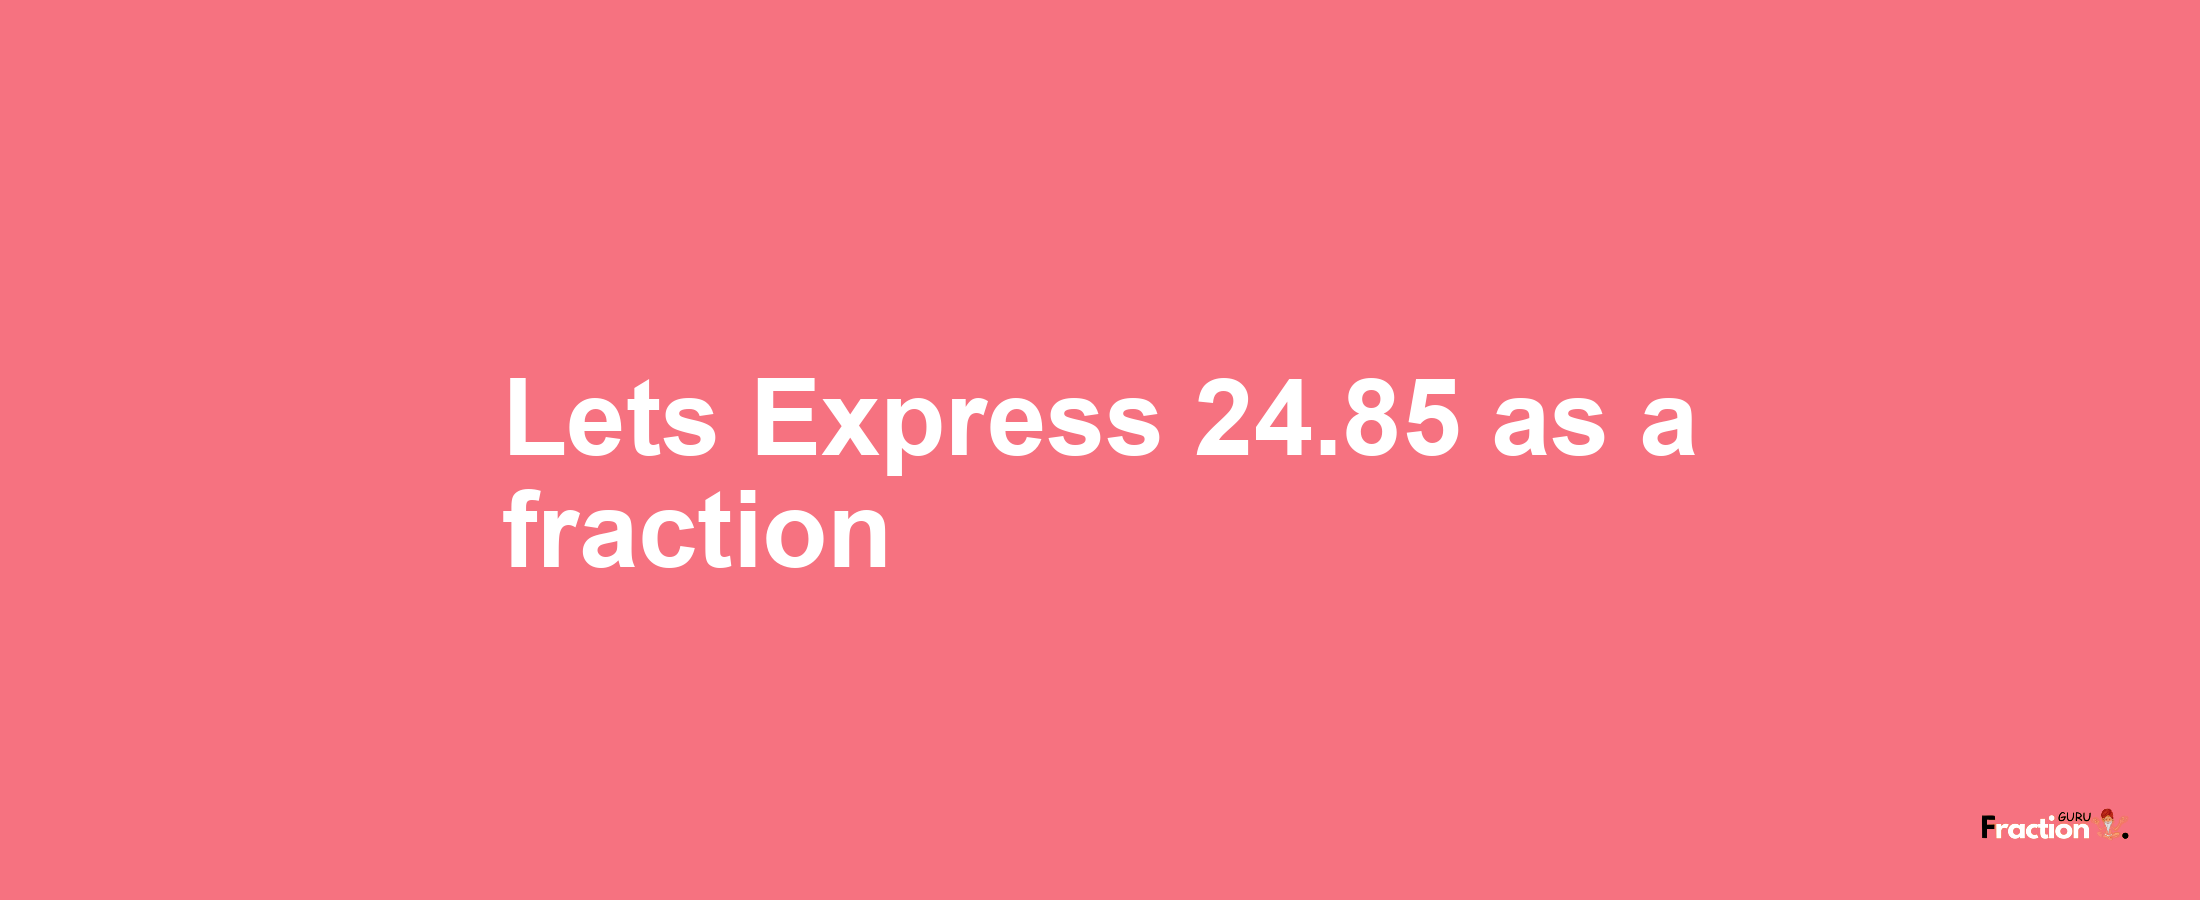 Lets Express 24.85 as afraction